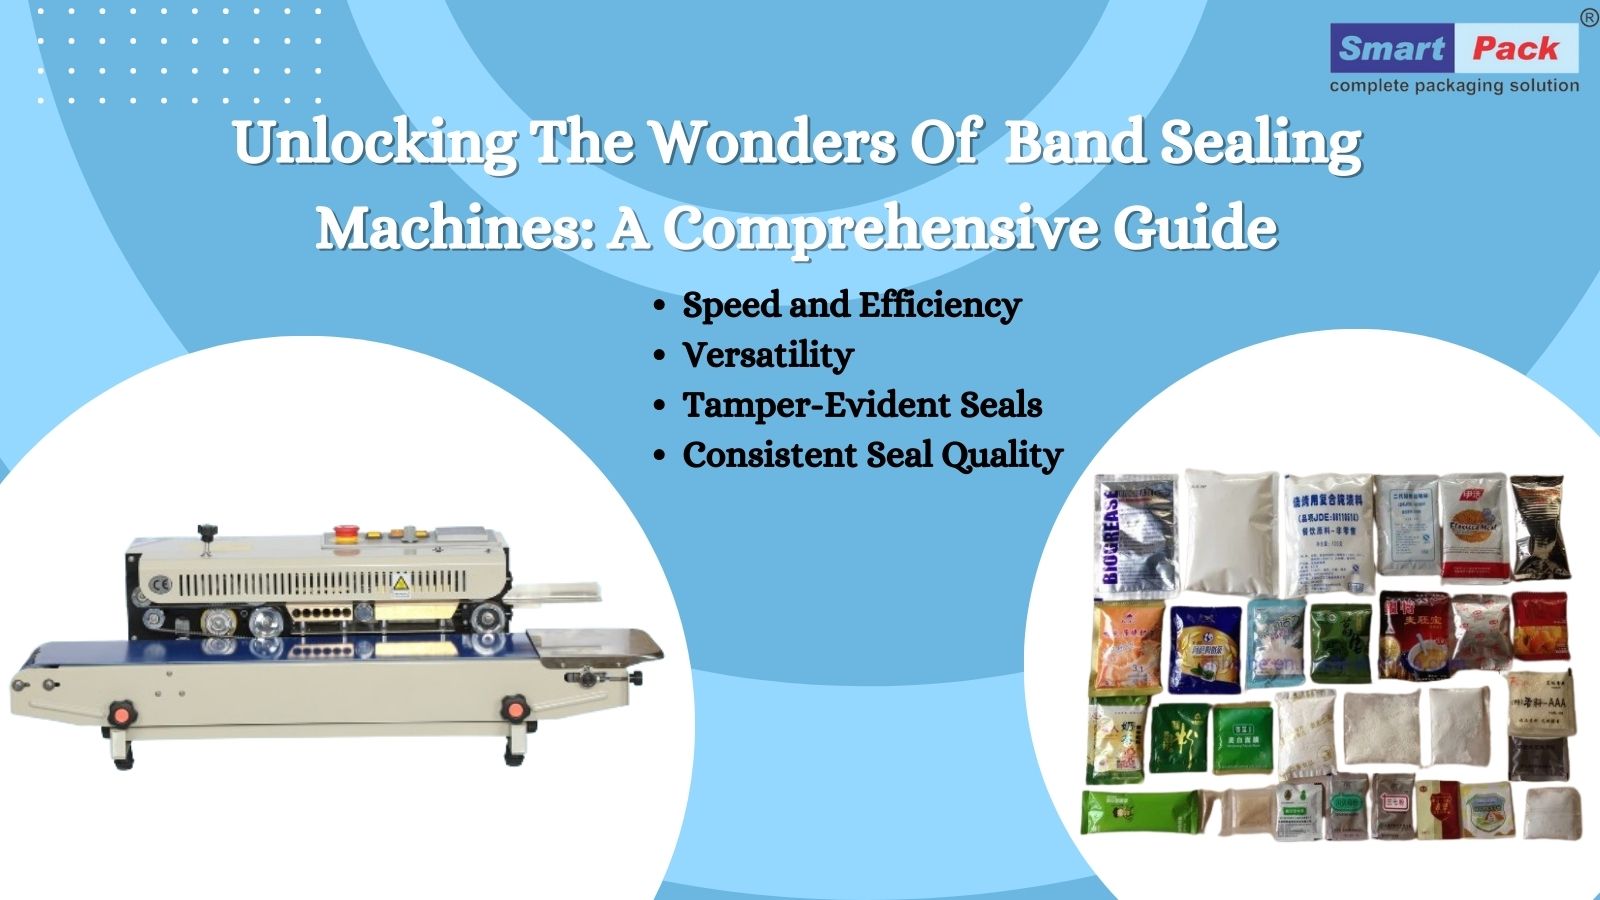 Unlocking the Wonders of Band Sealing Machines: A Comprehensive Guide